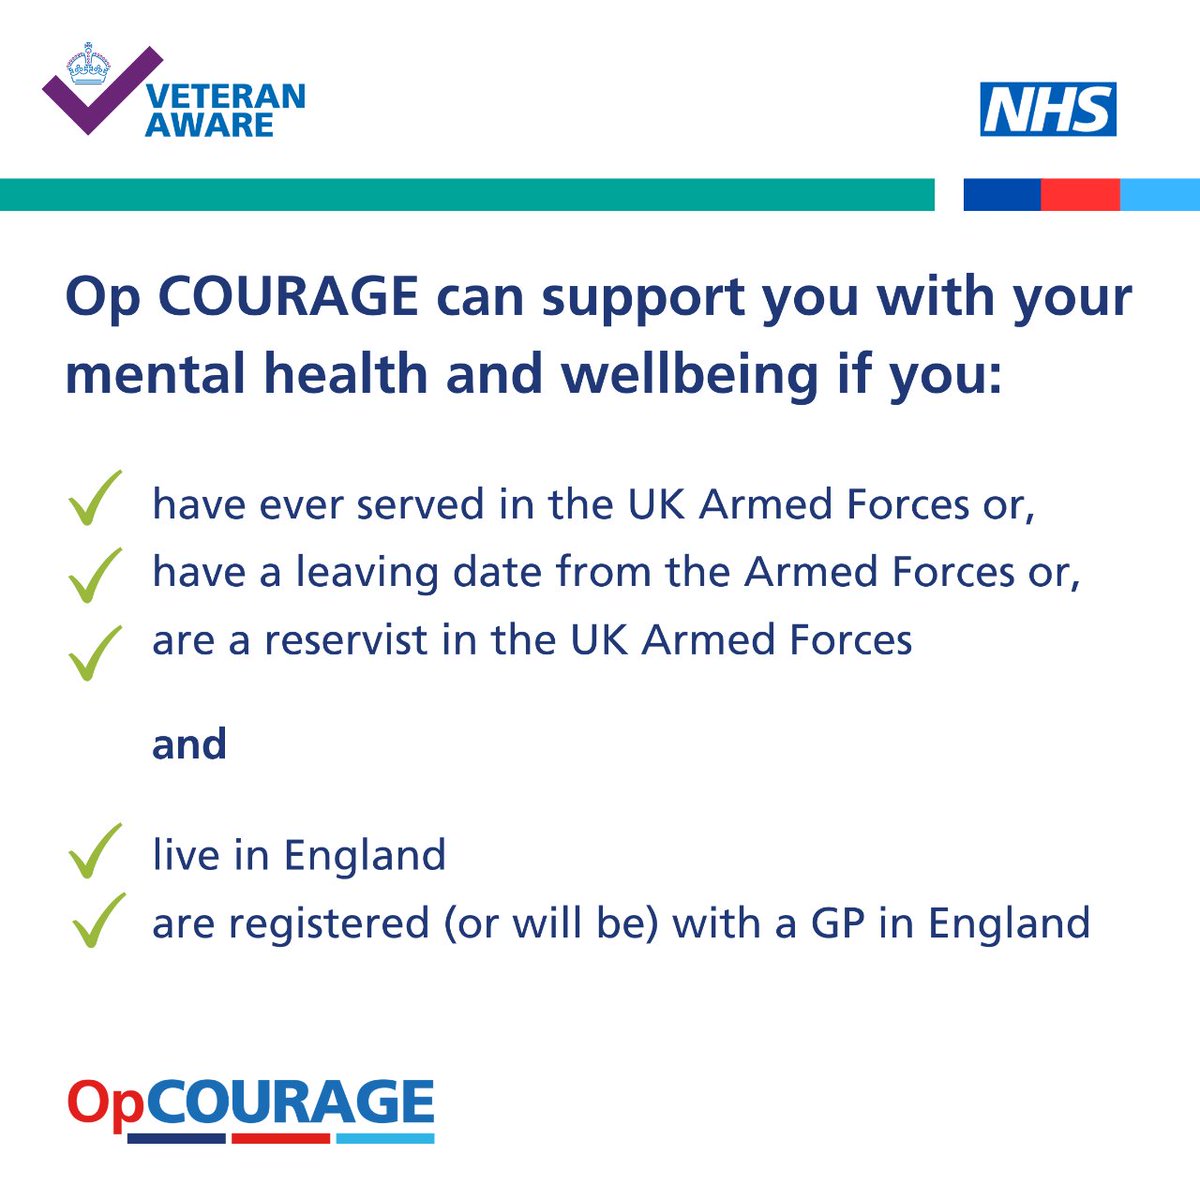 Did you know that anyone can make a referral to Op COURAGE on behalf on a veteran, reservist or service leaver?  Details of how to make a referral can be found at nhs.uk/opcourage #MentalHealthMatters @NHSArmedForces @NHSEArmedForces @NHSOpRESTORE @OpNOVA_UK